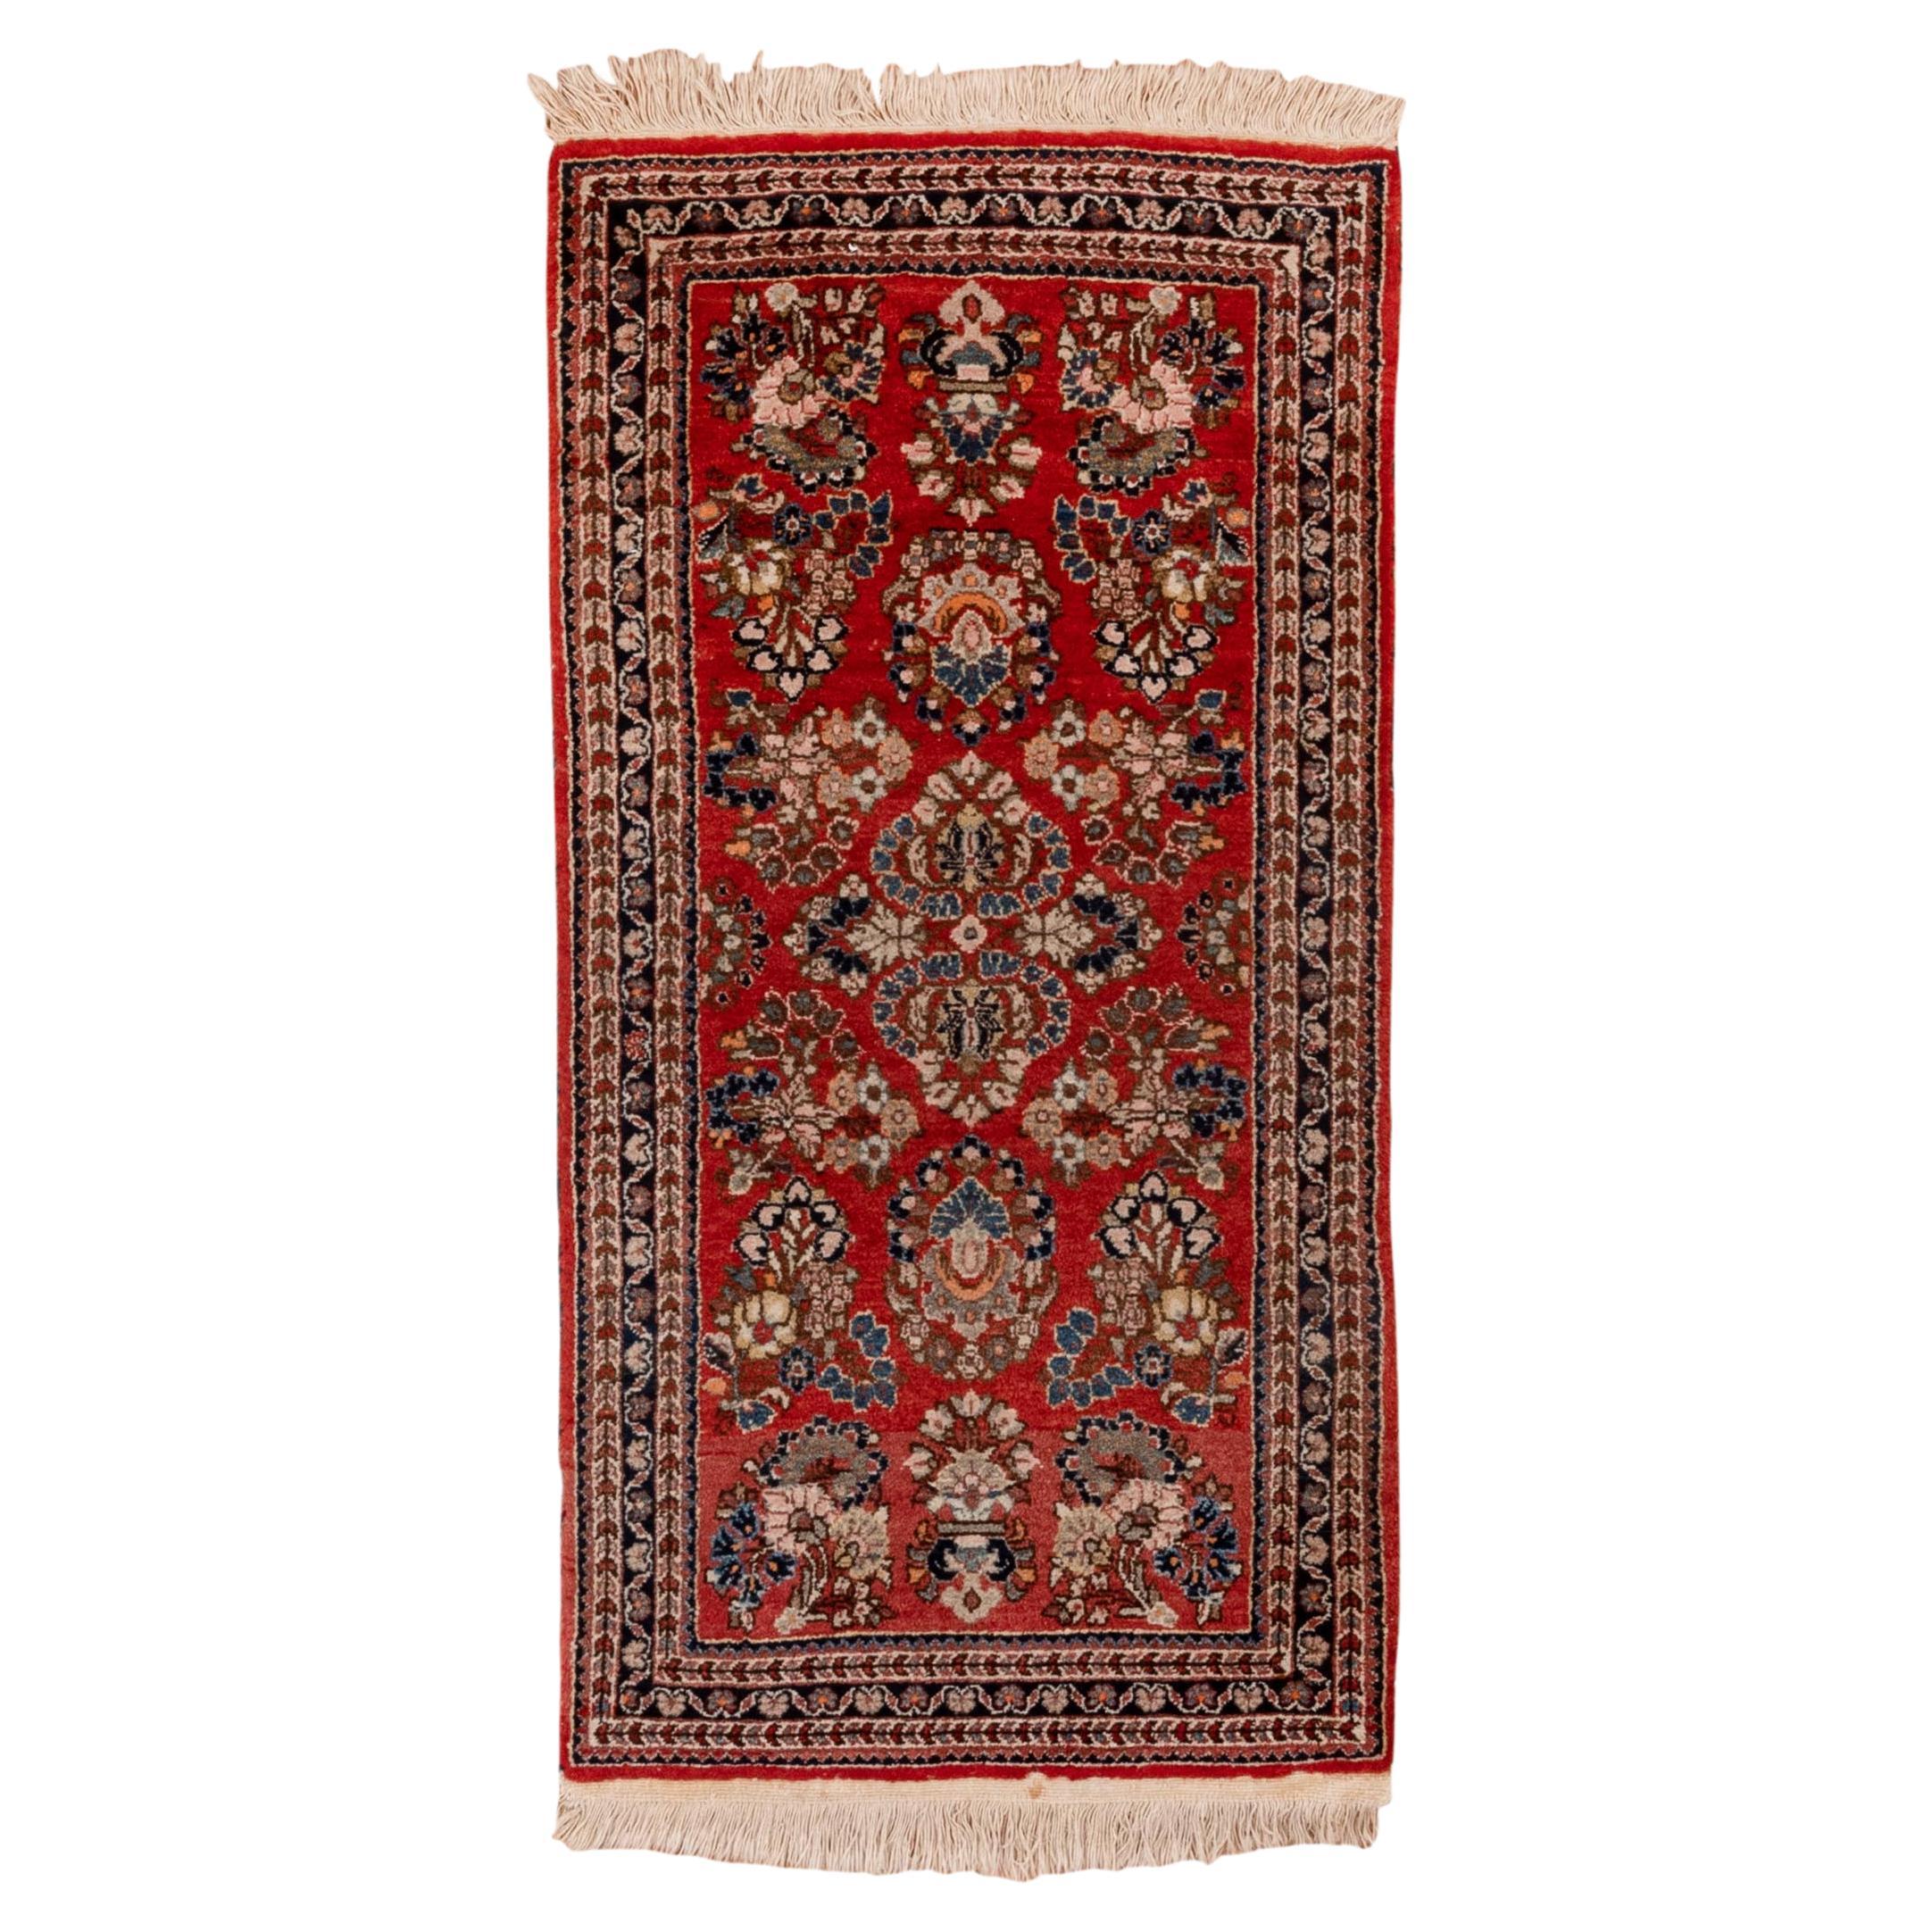 Sarouk Rug in Formal, Traditional Persian Style - Bright Red with Florets